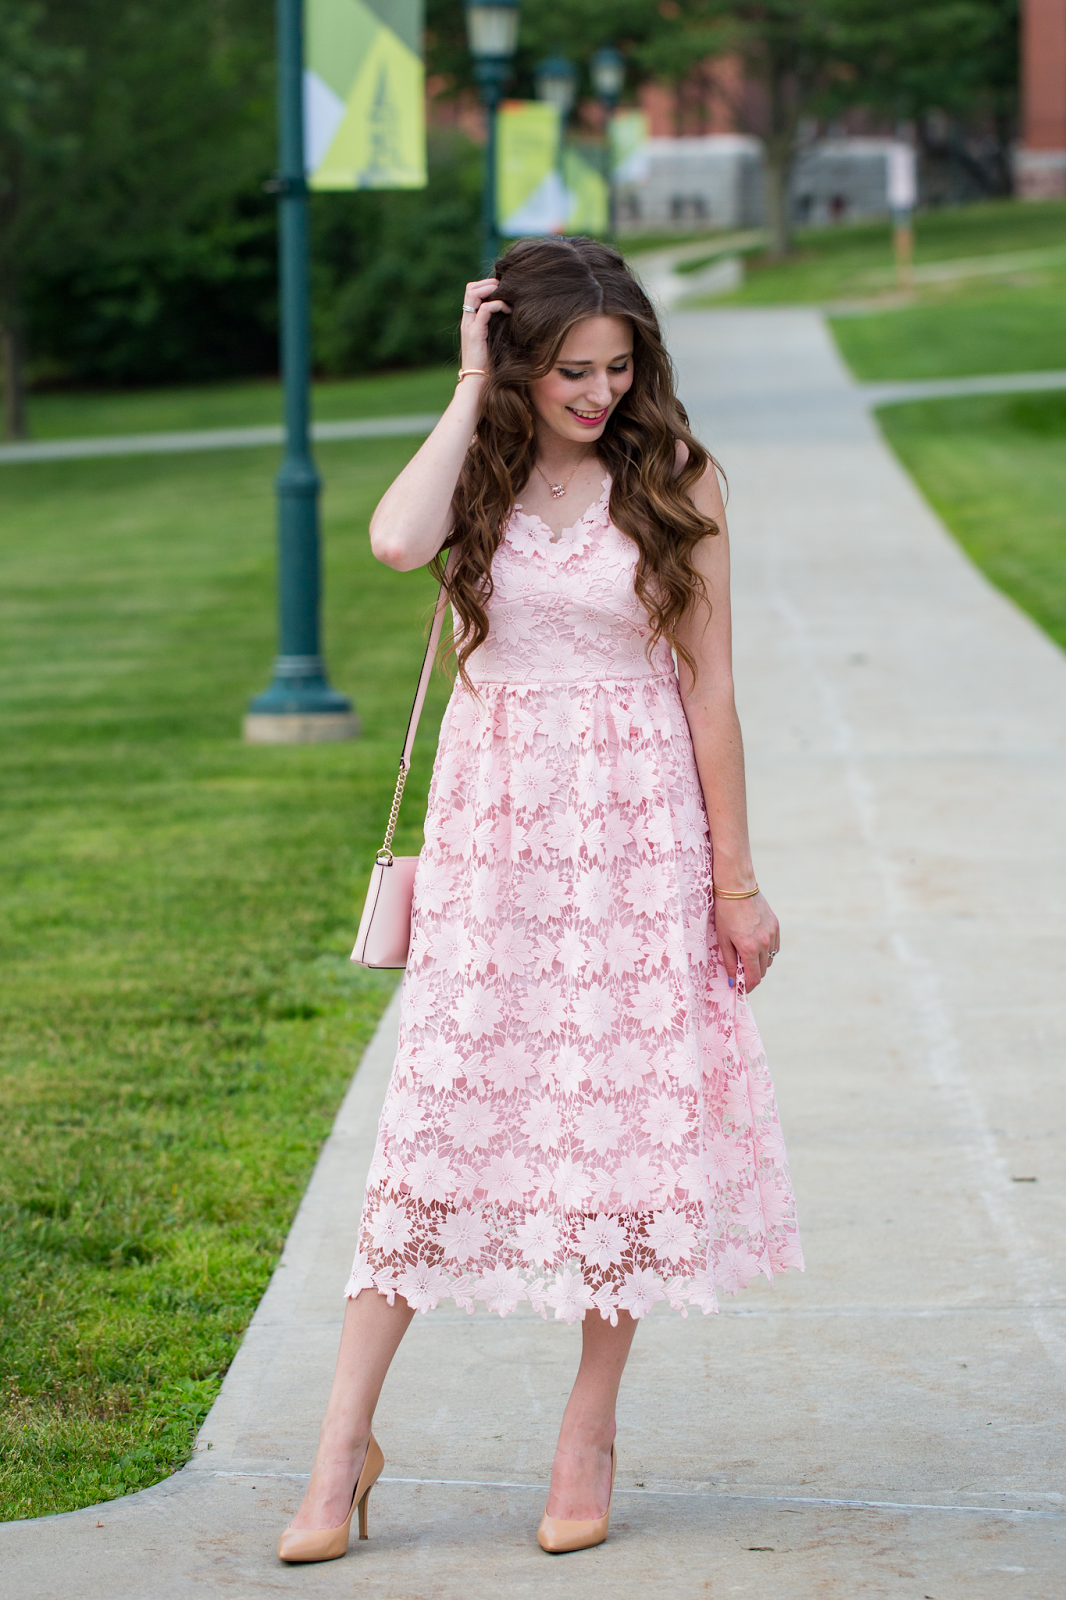 The Most Feminine Dress.  Southern Belle in Training